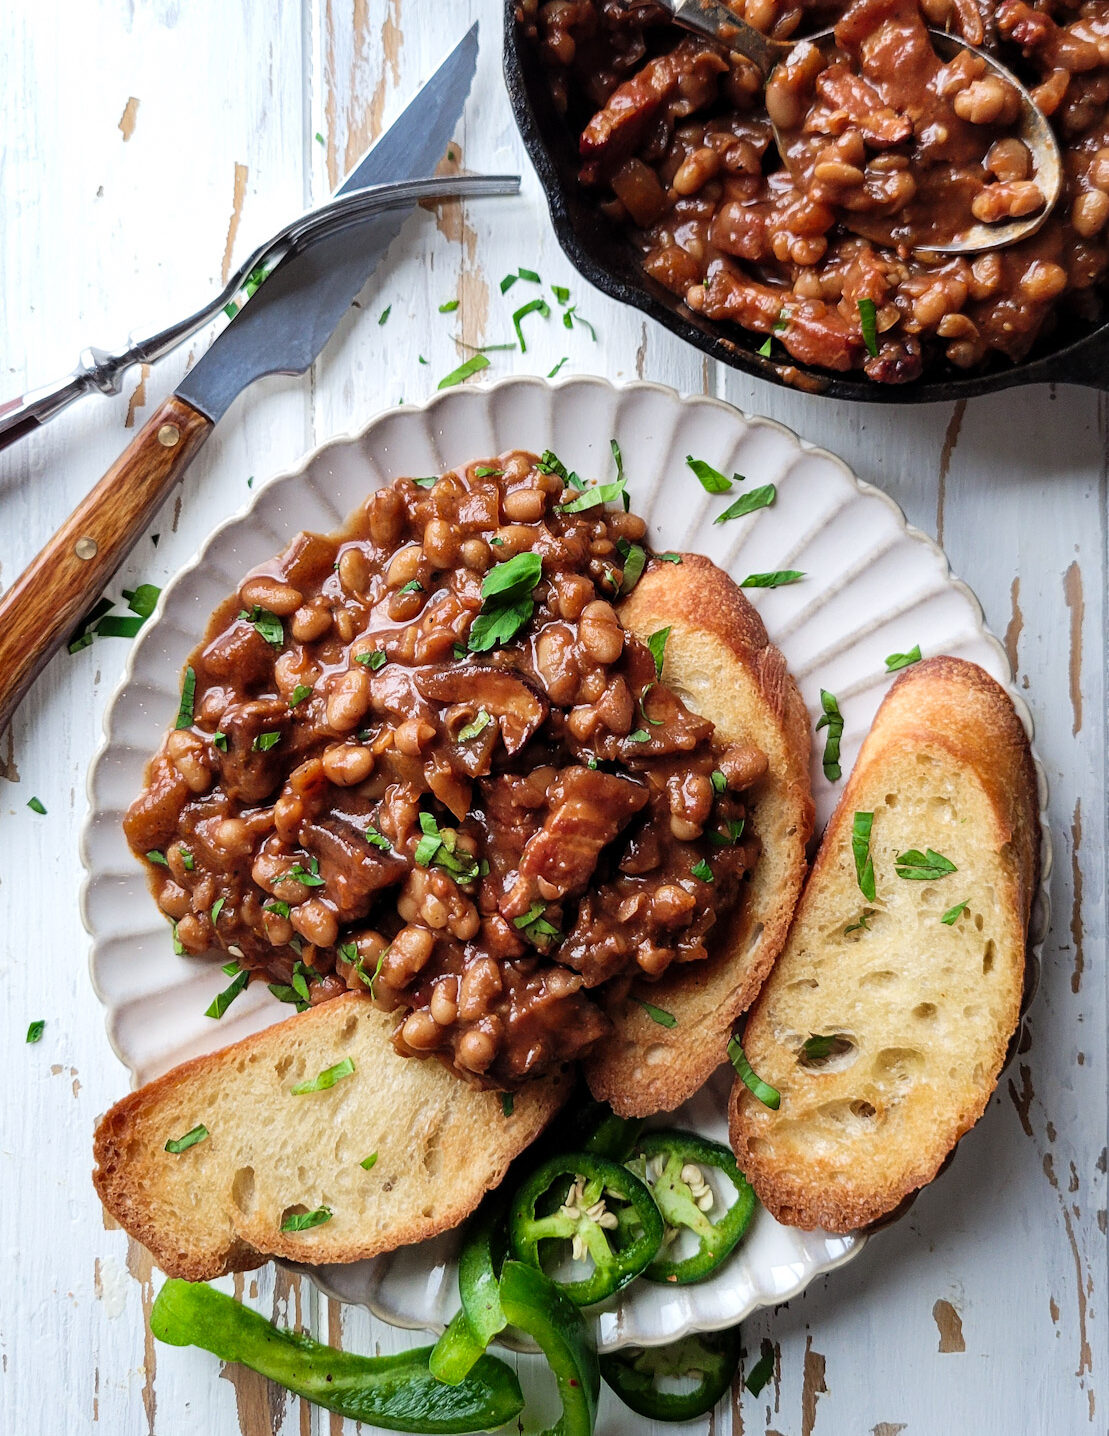 a plate with Classic Baked Beans on Toast, with the skillet of baked beans to the side. The plate is garnished with parsley and peppers.